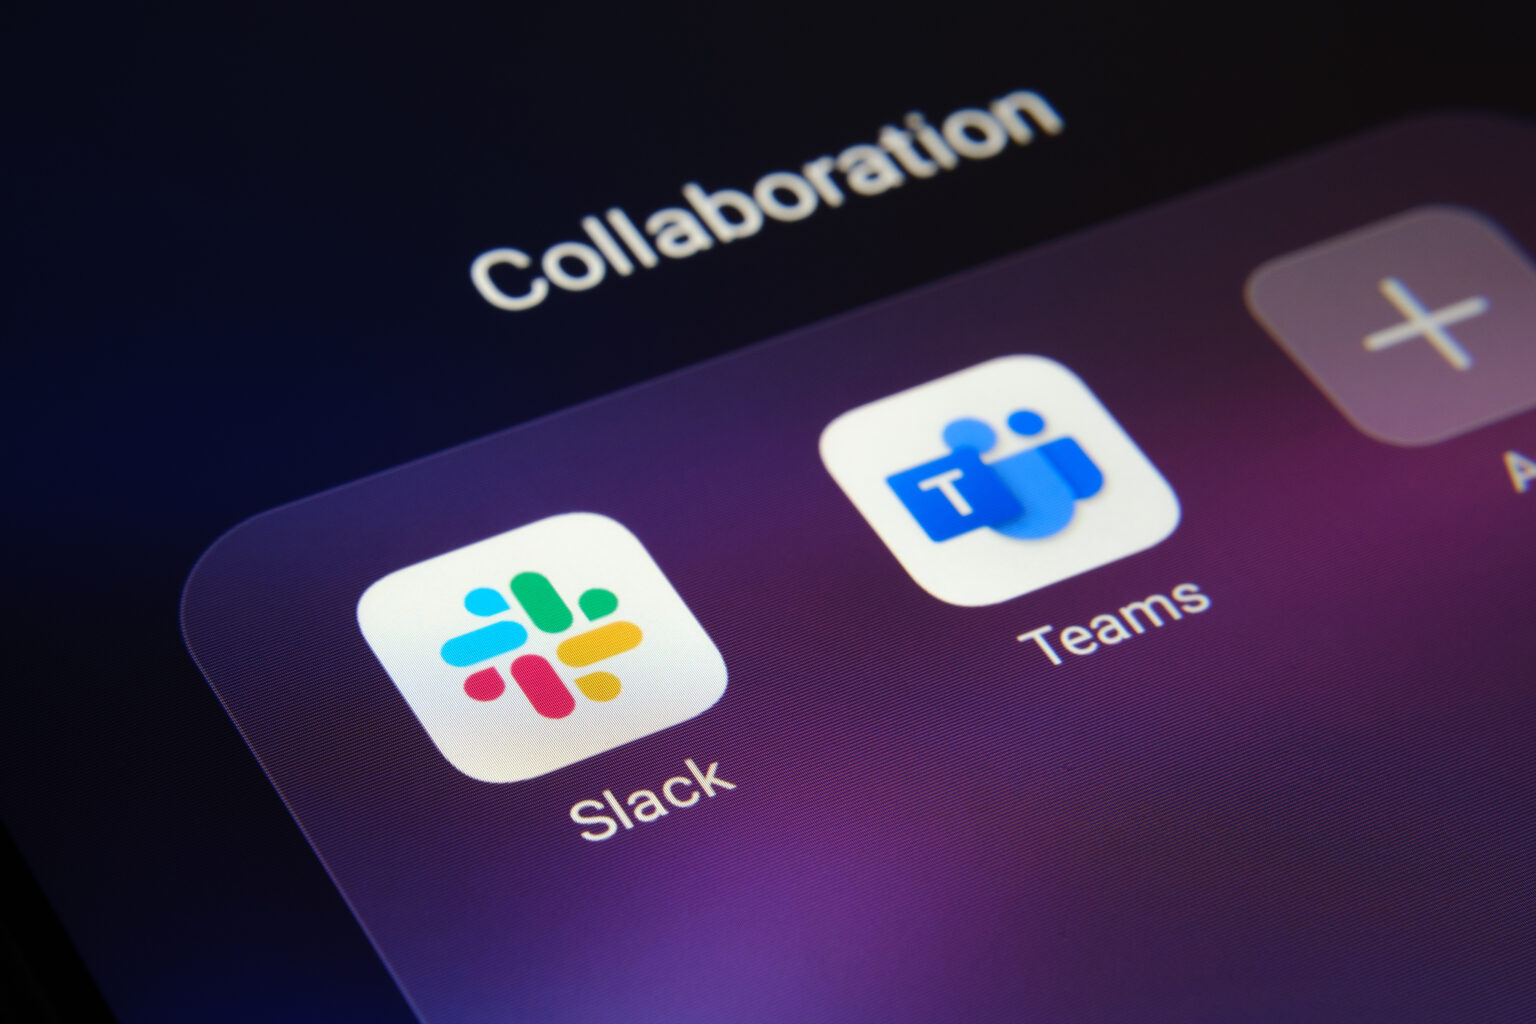 This is a corner of a smartphone with Slack and Teams apps.